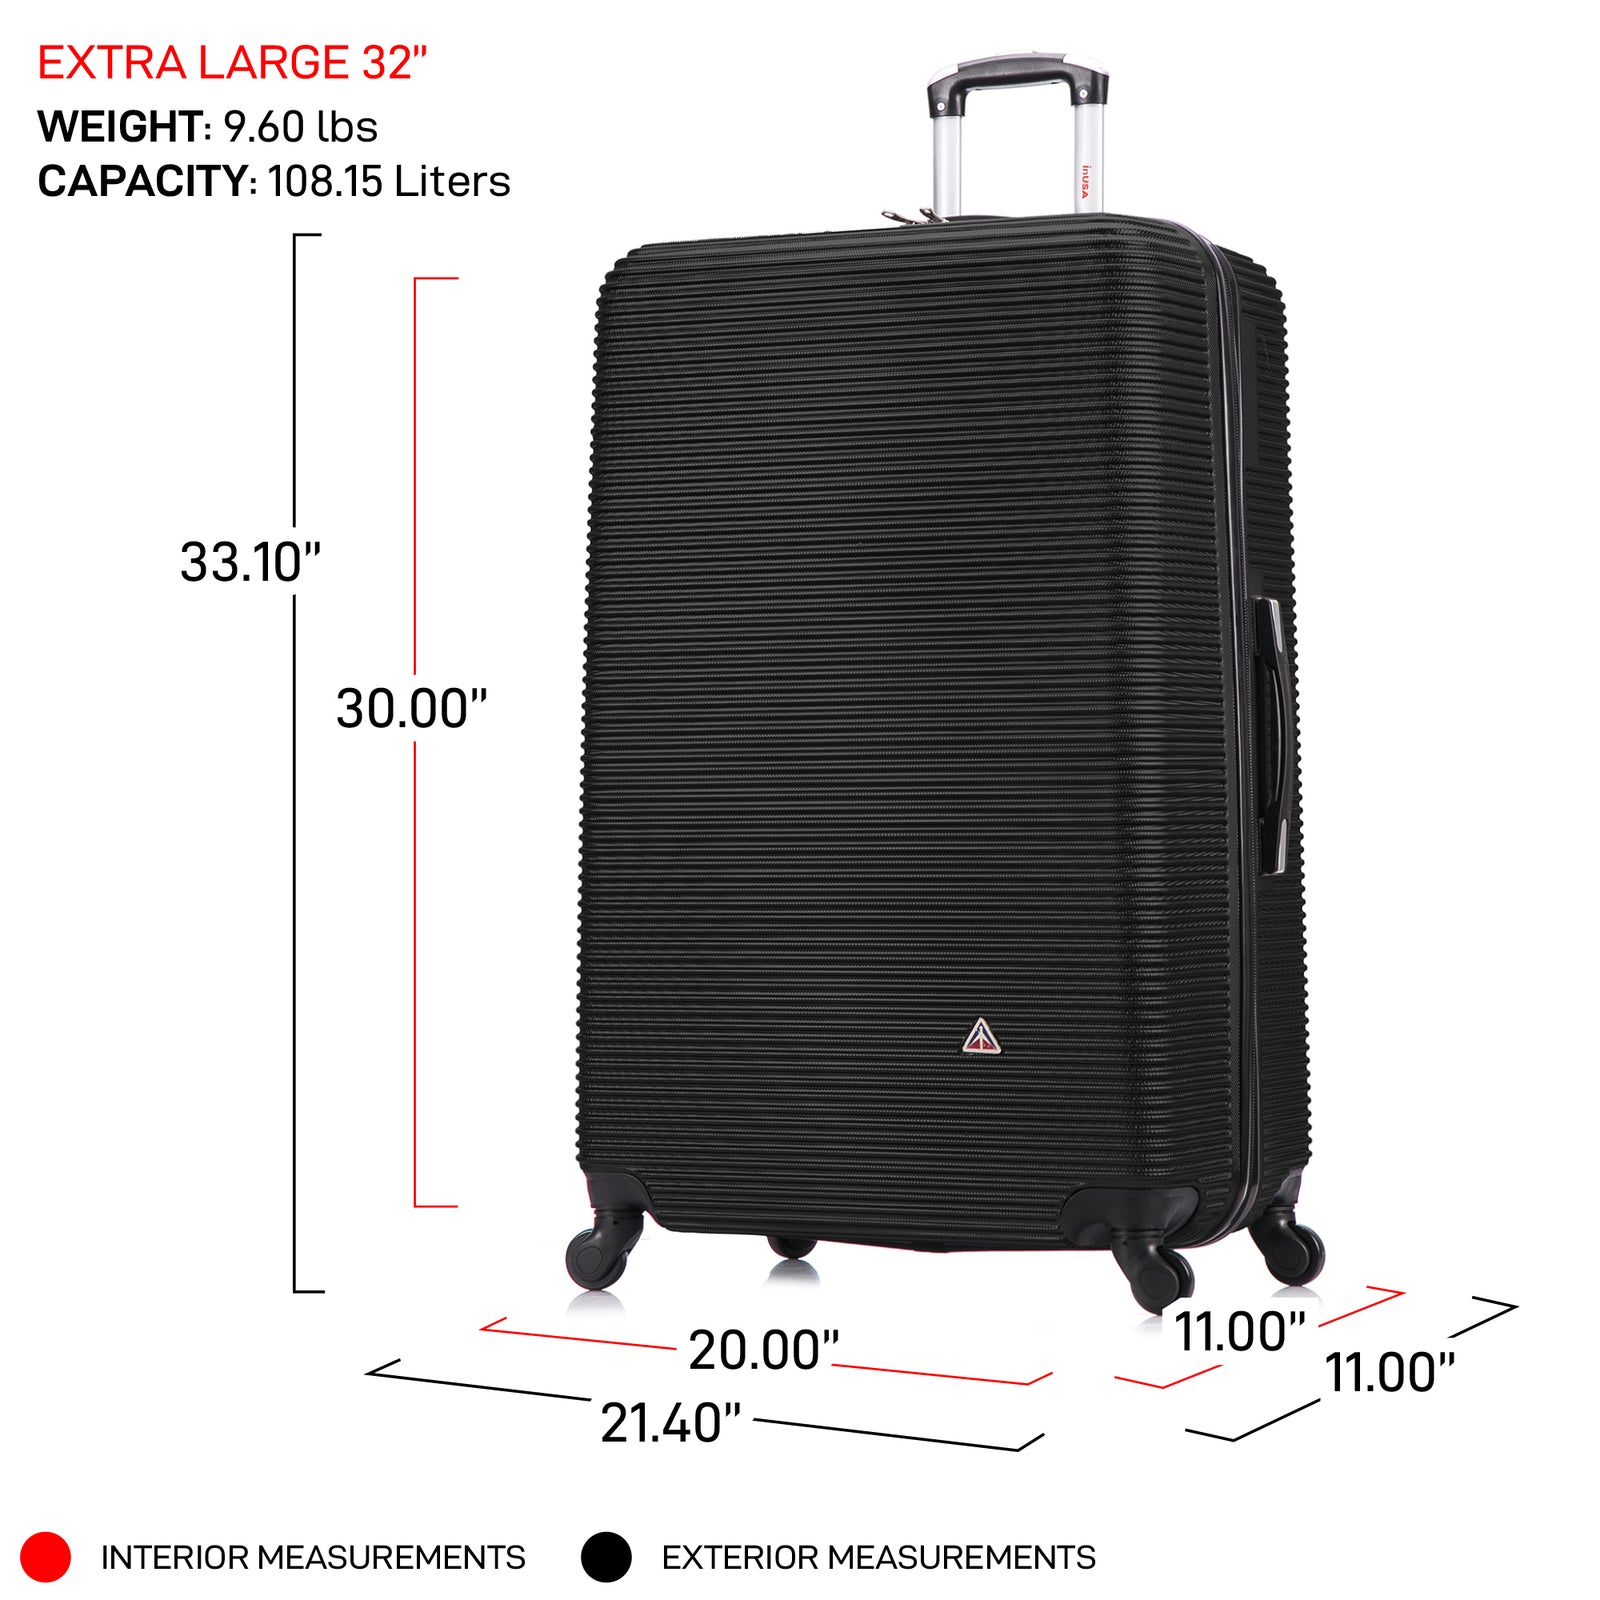 Load image into Gallery viewer, Royal 32 Inch Extra Large Hardside Luggage